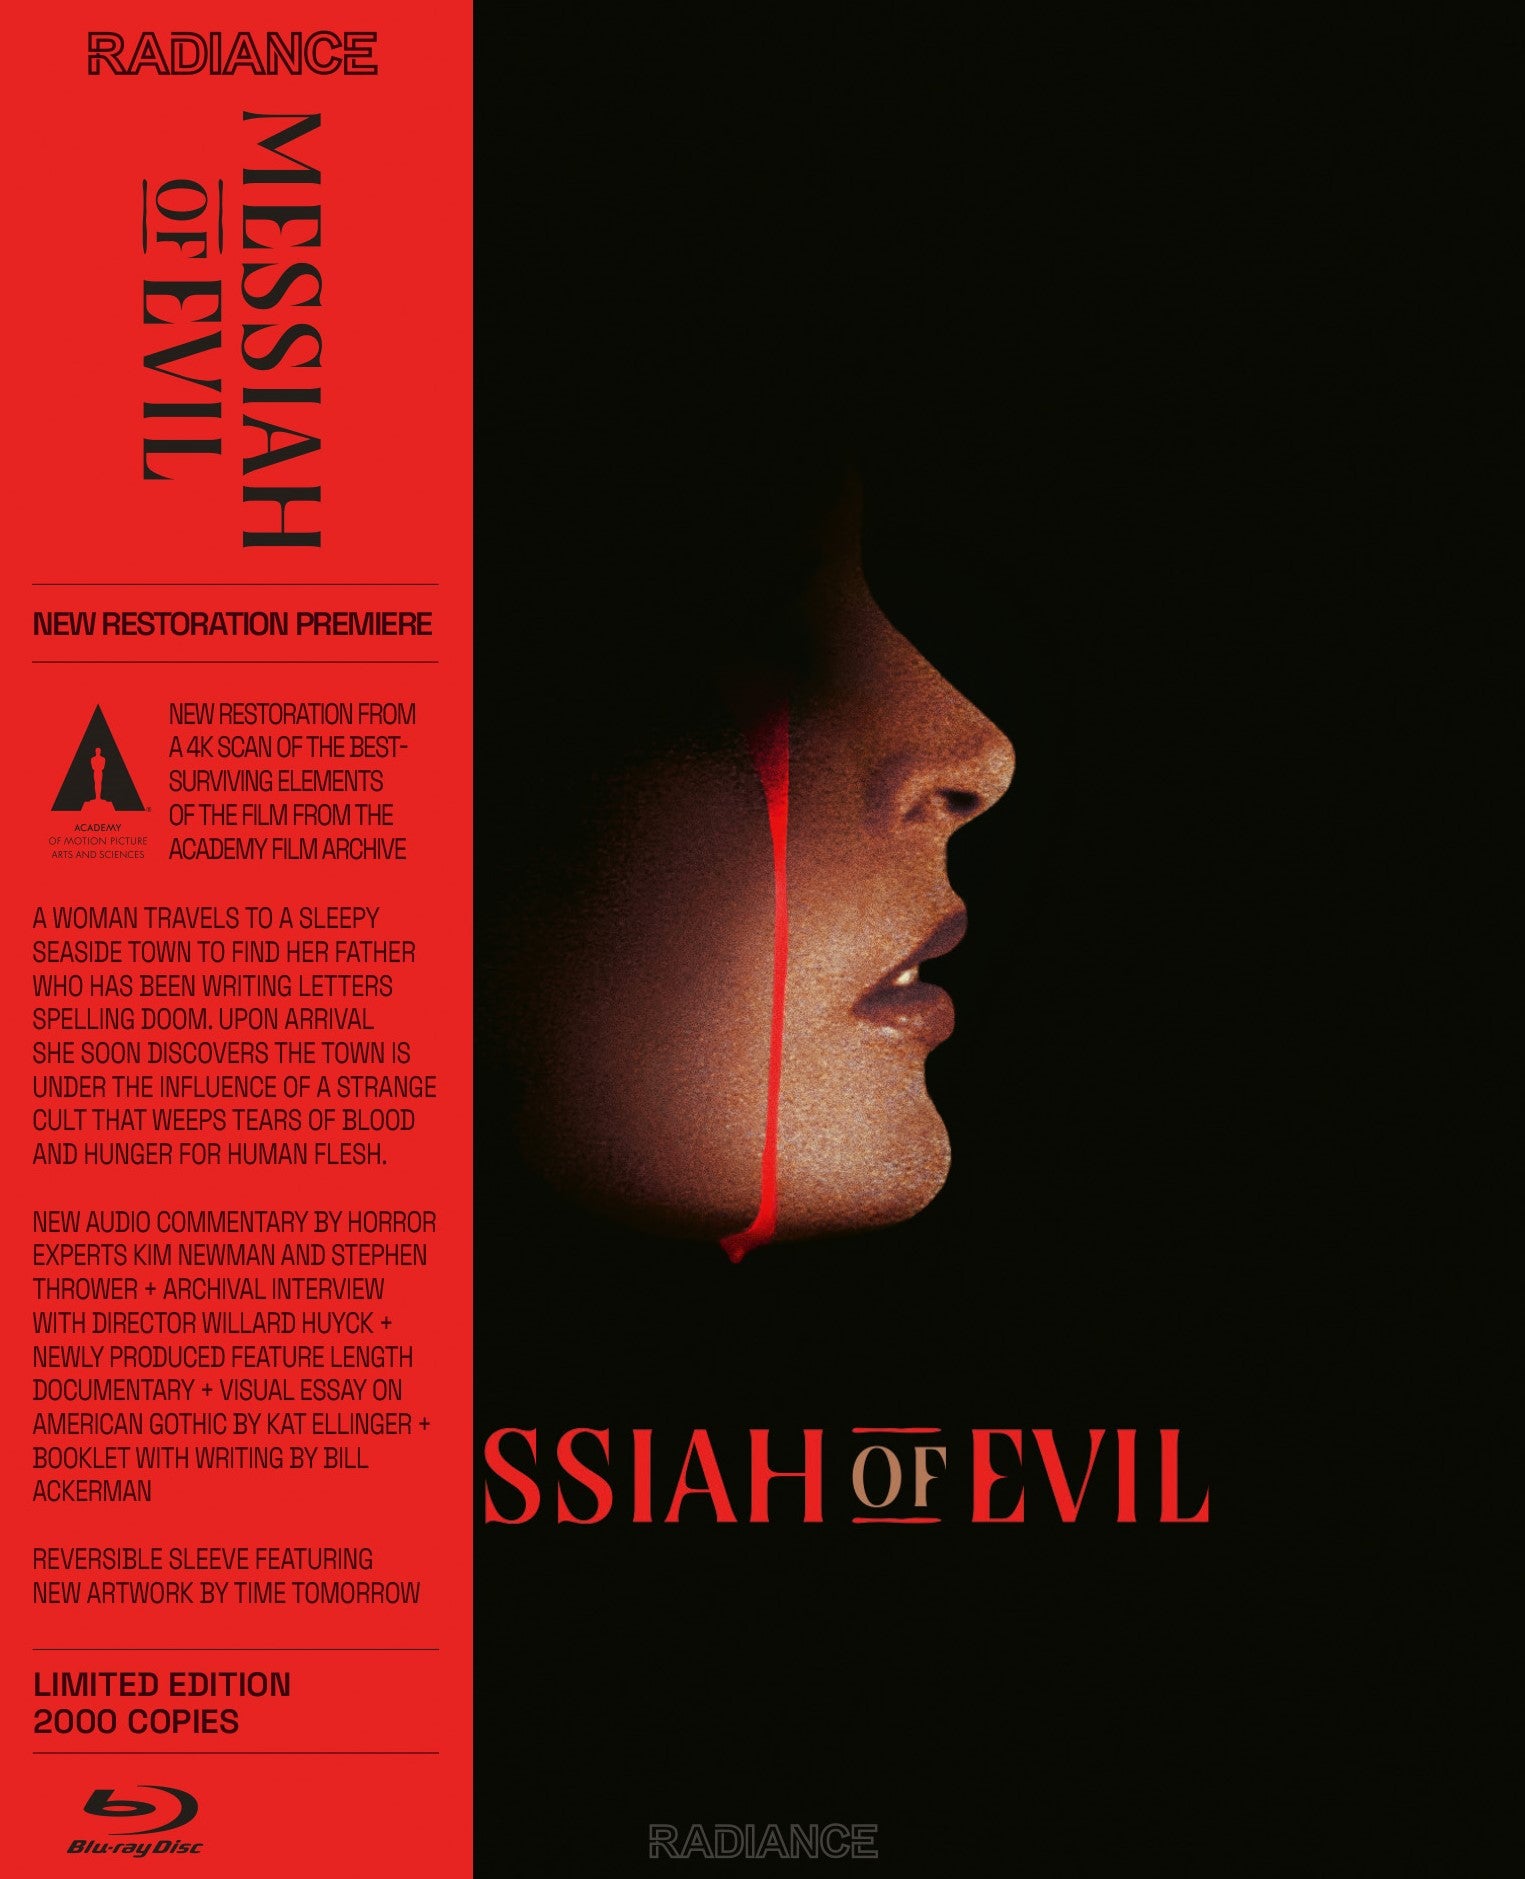 MESSIAH OF EVIL (SPECIAL EDITION) BLU-RAY [PRE-ORDER]